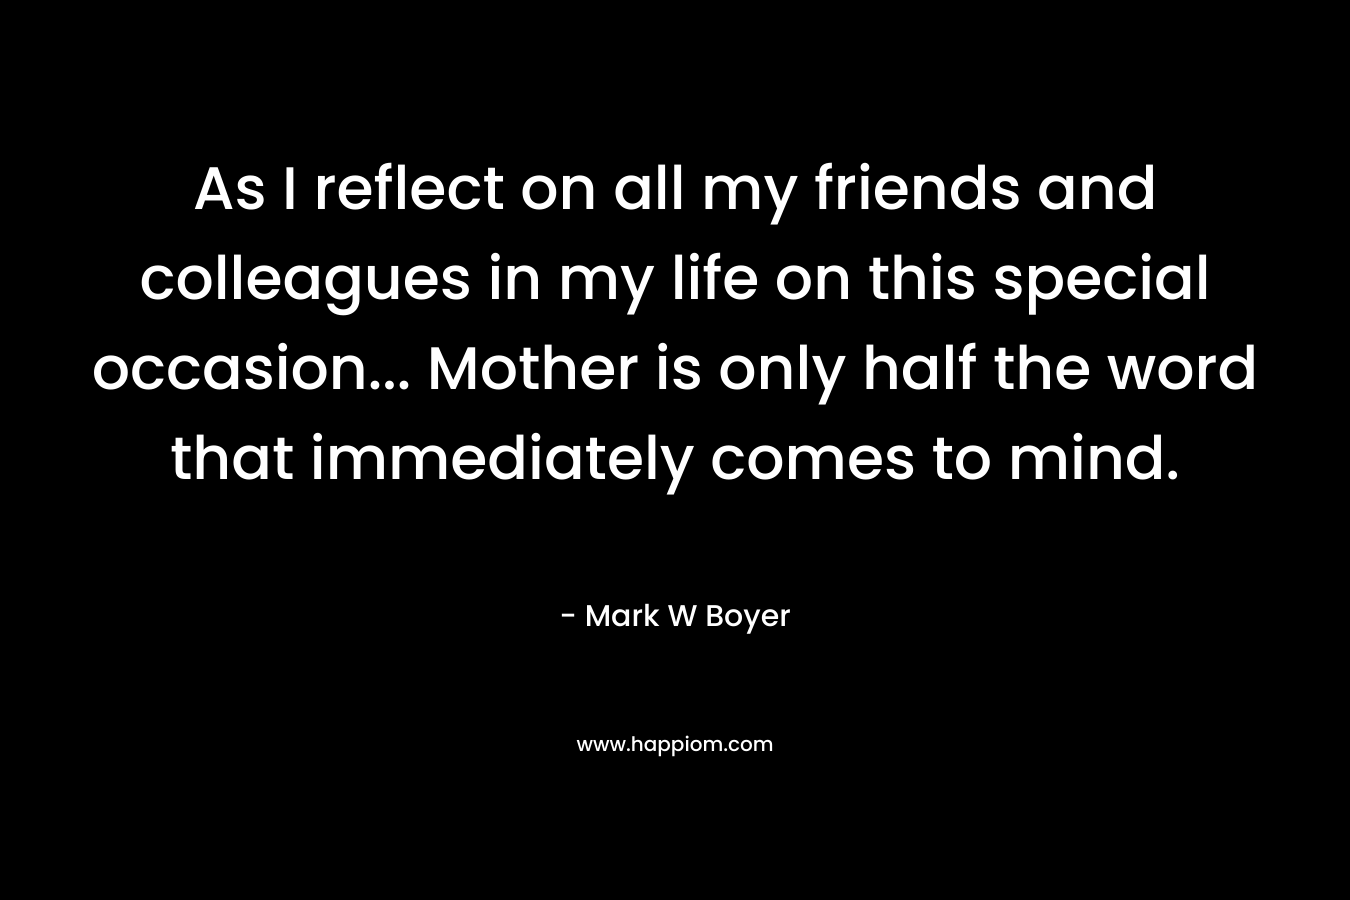 As I reflect on all my friends and colleagues in my life on this special occasion… Mother is only half the word that immediately comes to mind. – Mark W Boyer